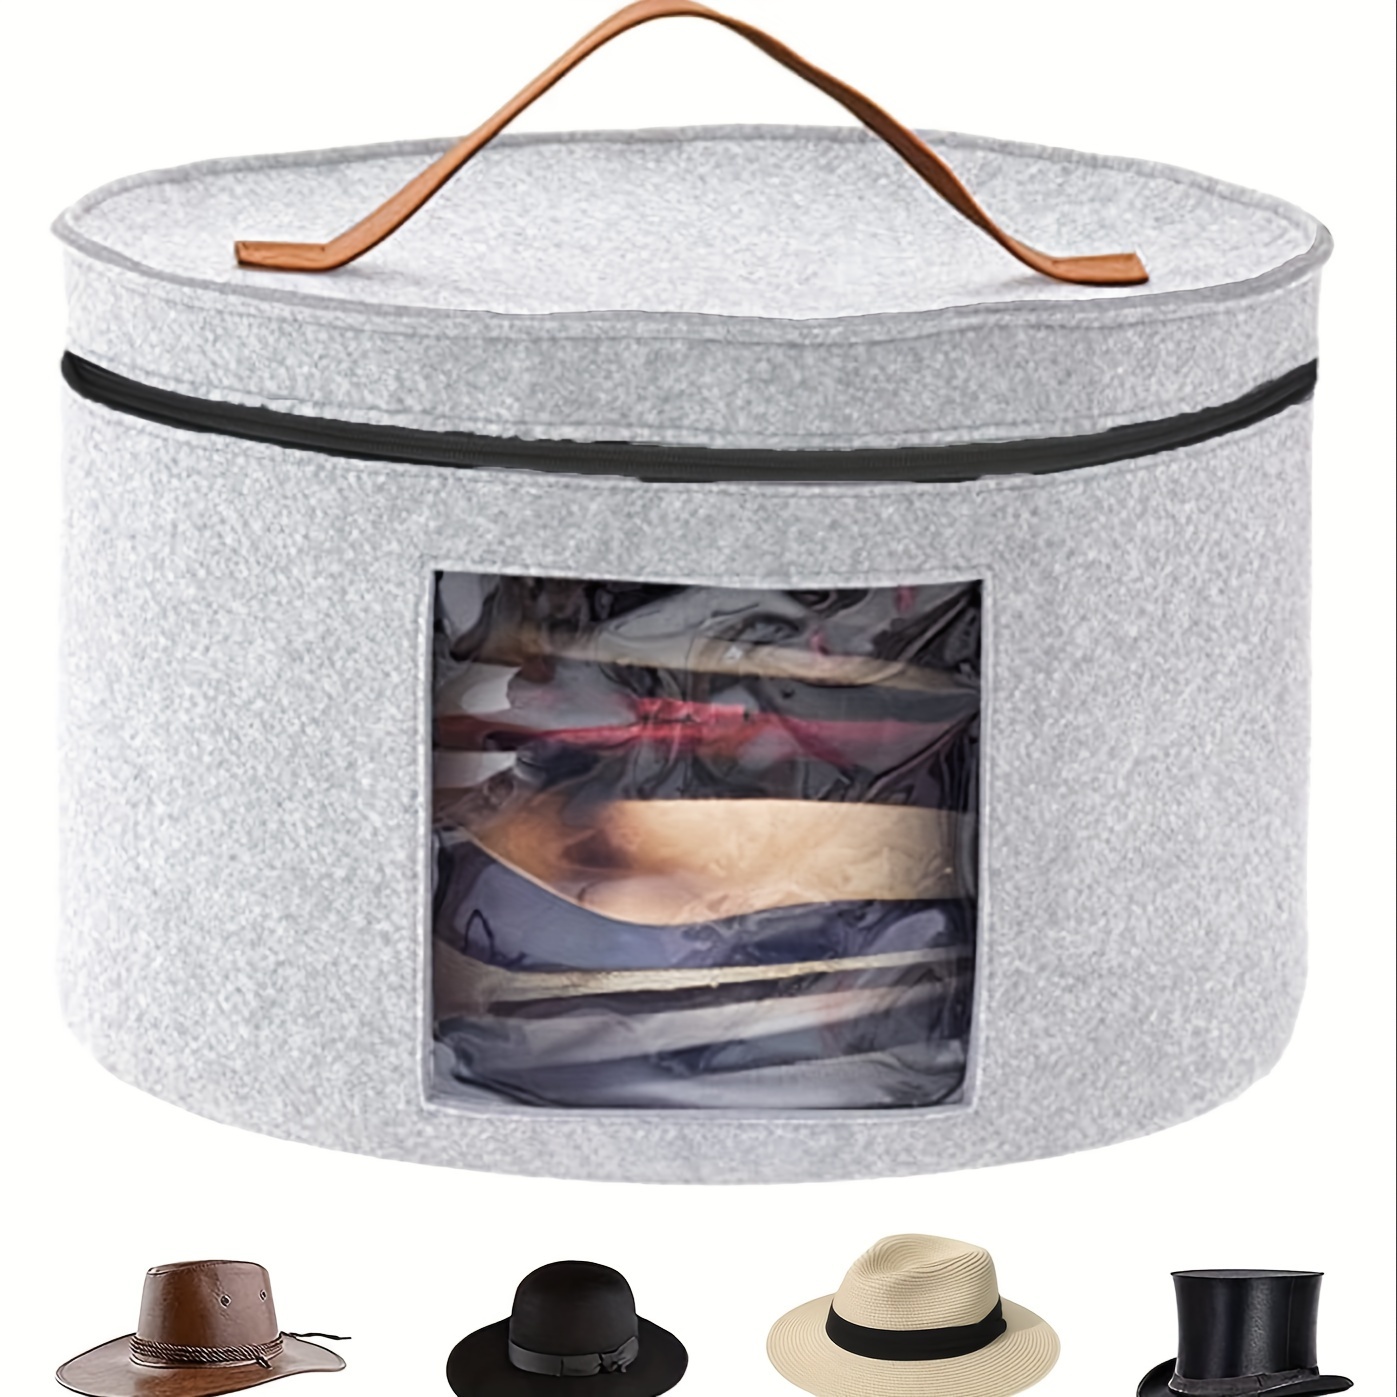 Munskine Hat Boxes for Women Storage & Men Foldable Hat Storage Boxes - Large Capacity Storage Box with Lids Round Box with Dustproof Lid Toy